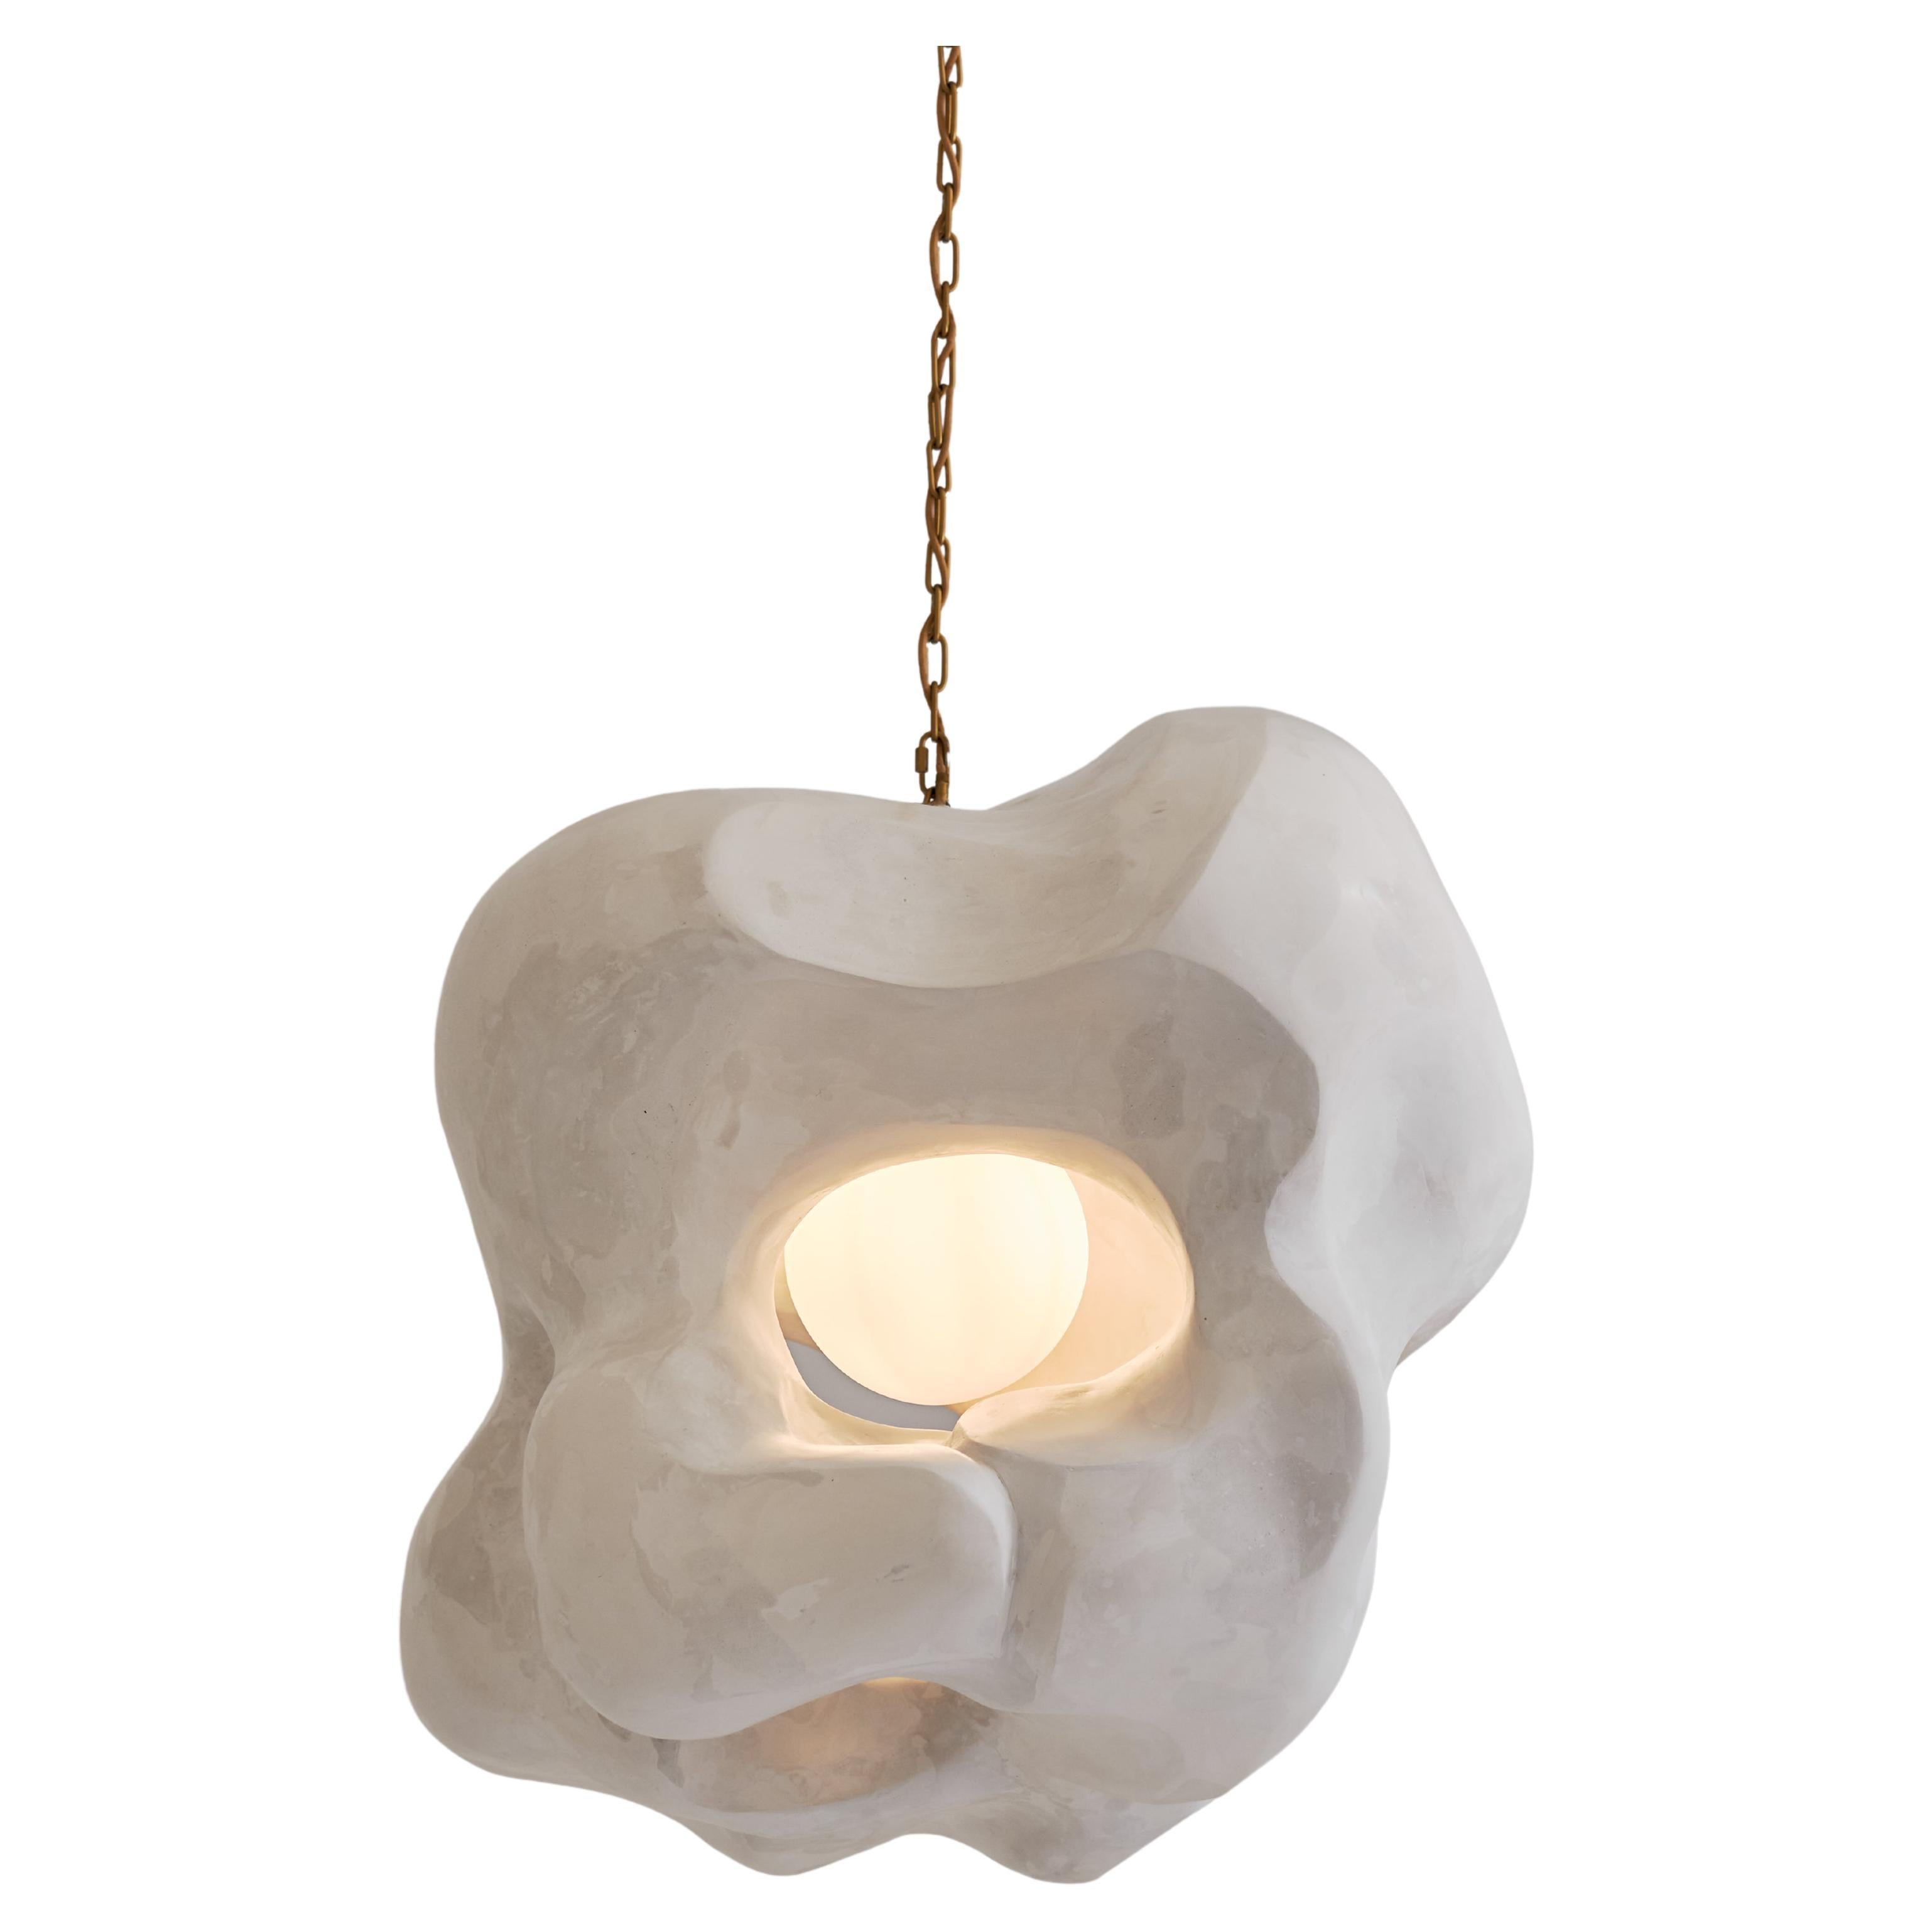 Large Contemporary Pendant Light, Sculptural Collectible Design "Ikigai" by AOAO For Sale